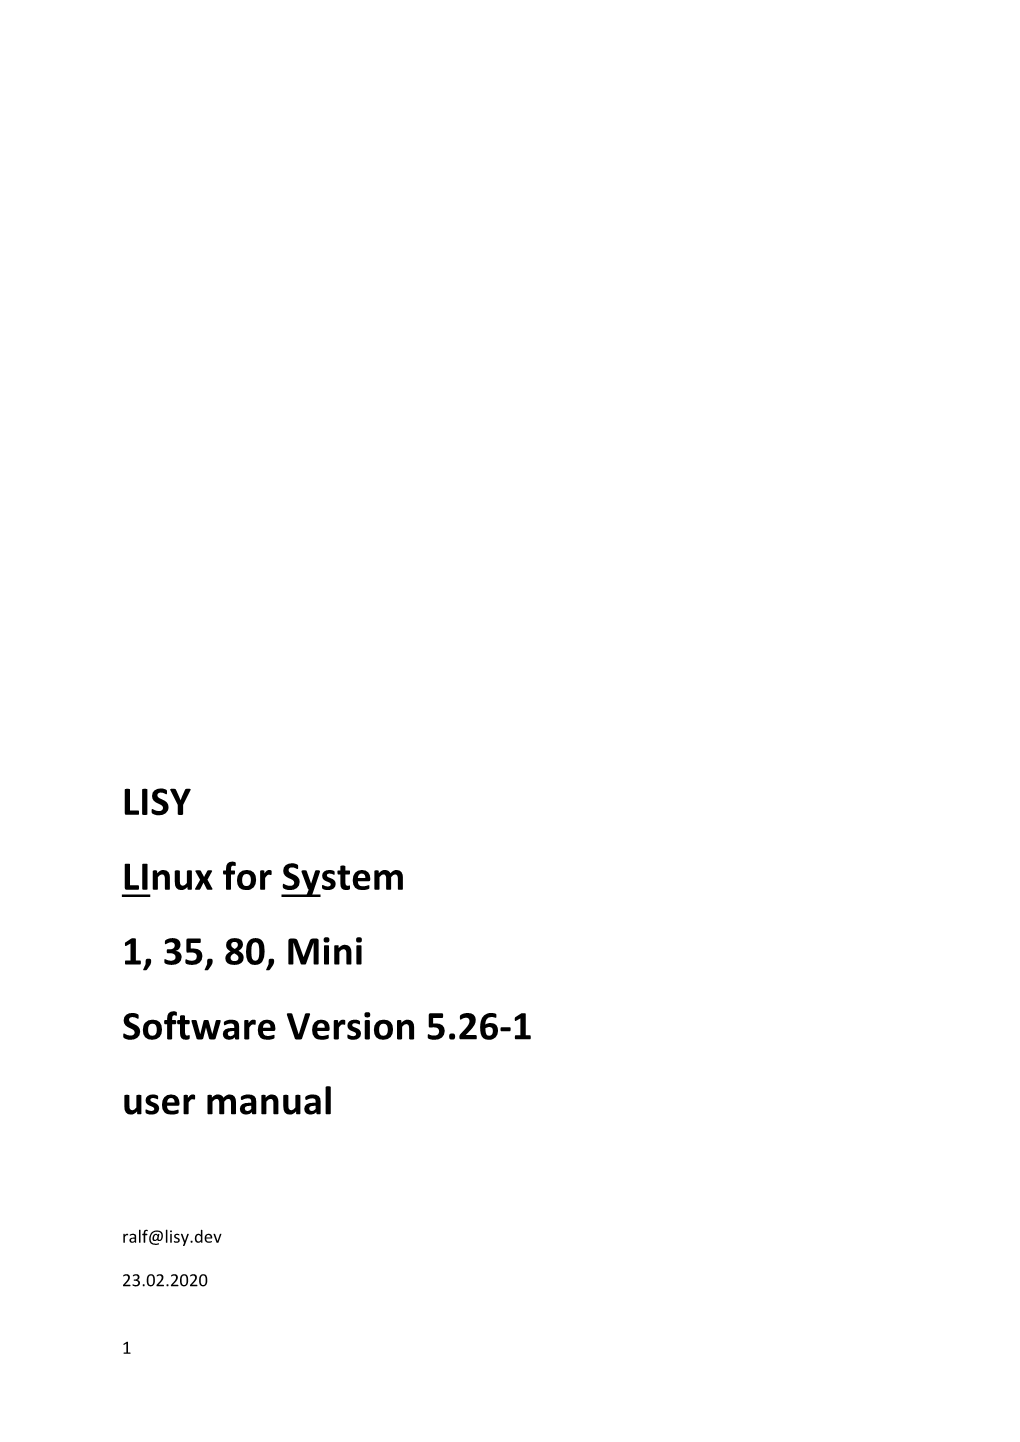 LISY Linux for System 1, 35, 80, Mini Software Version 5.26-1 User Manual